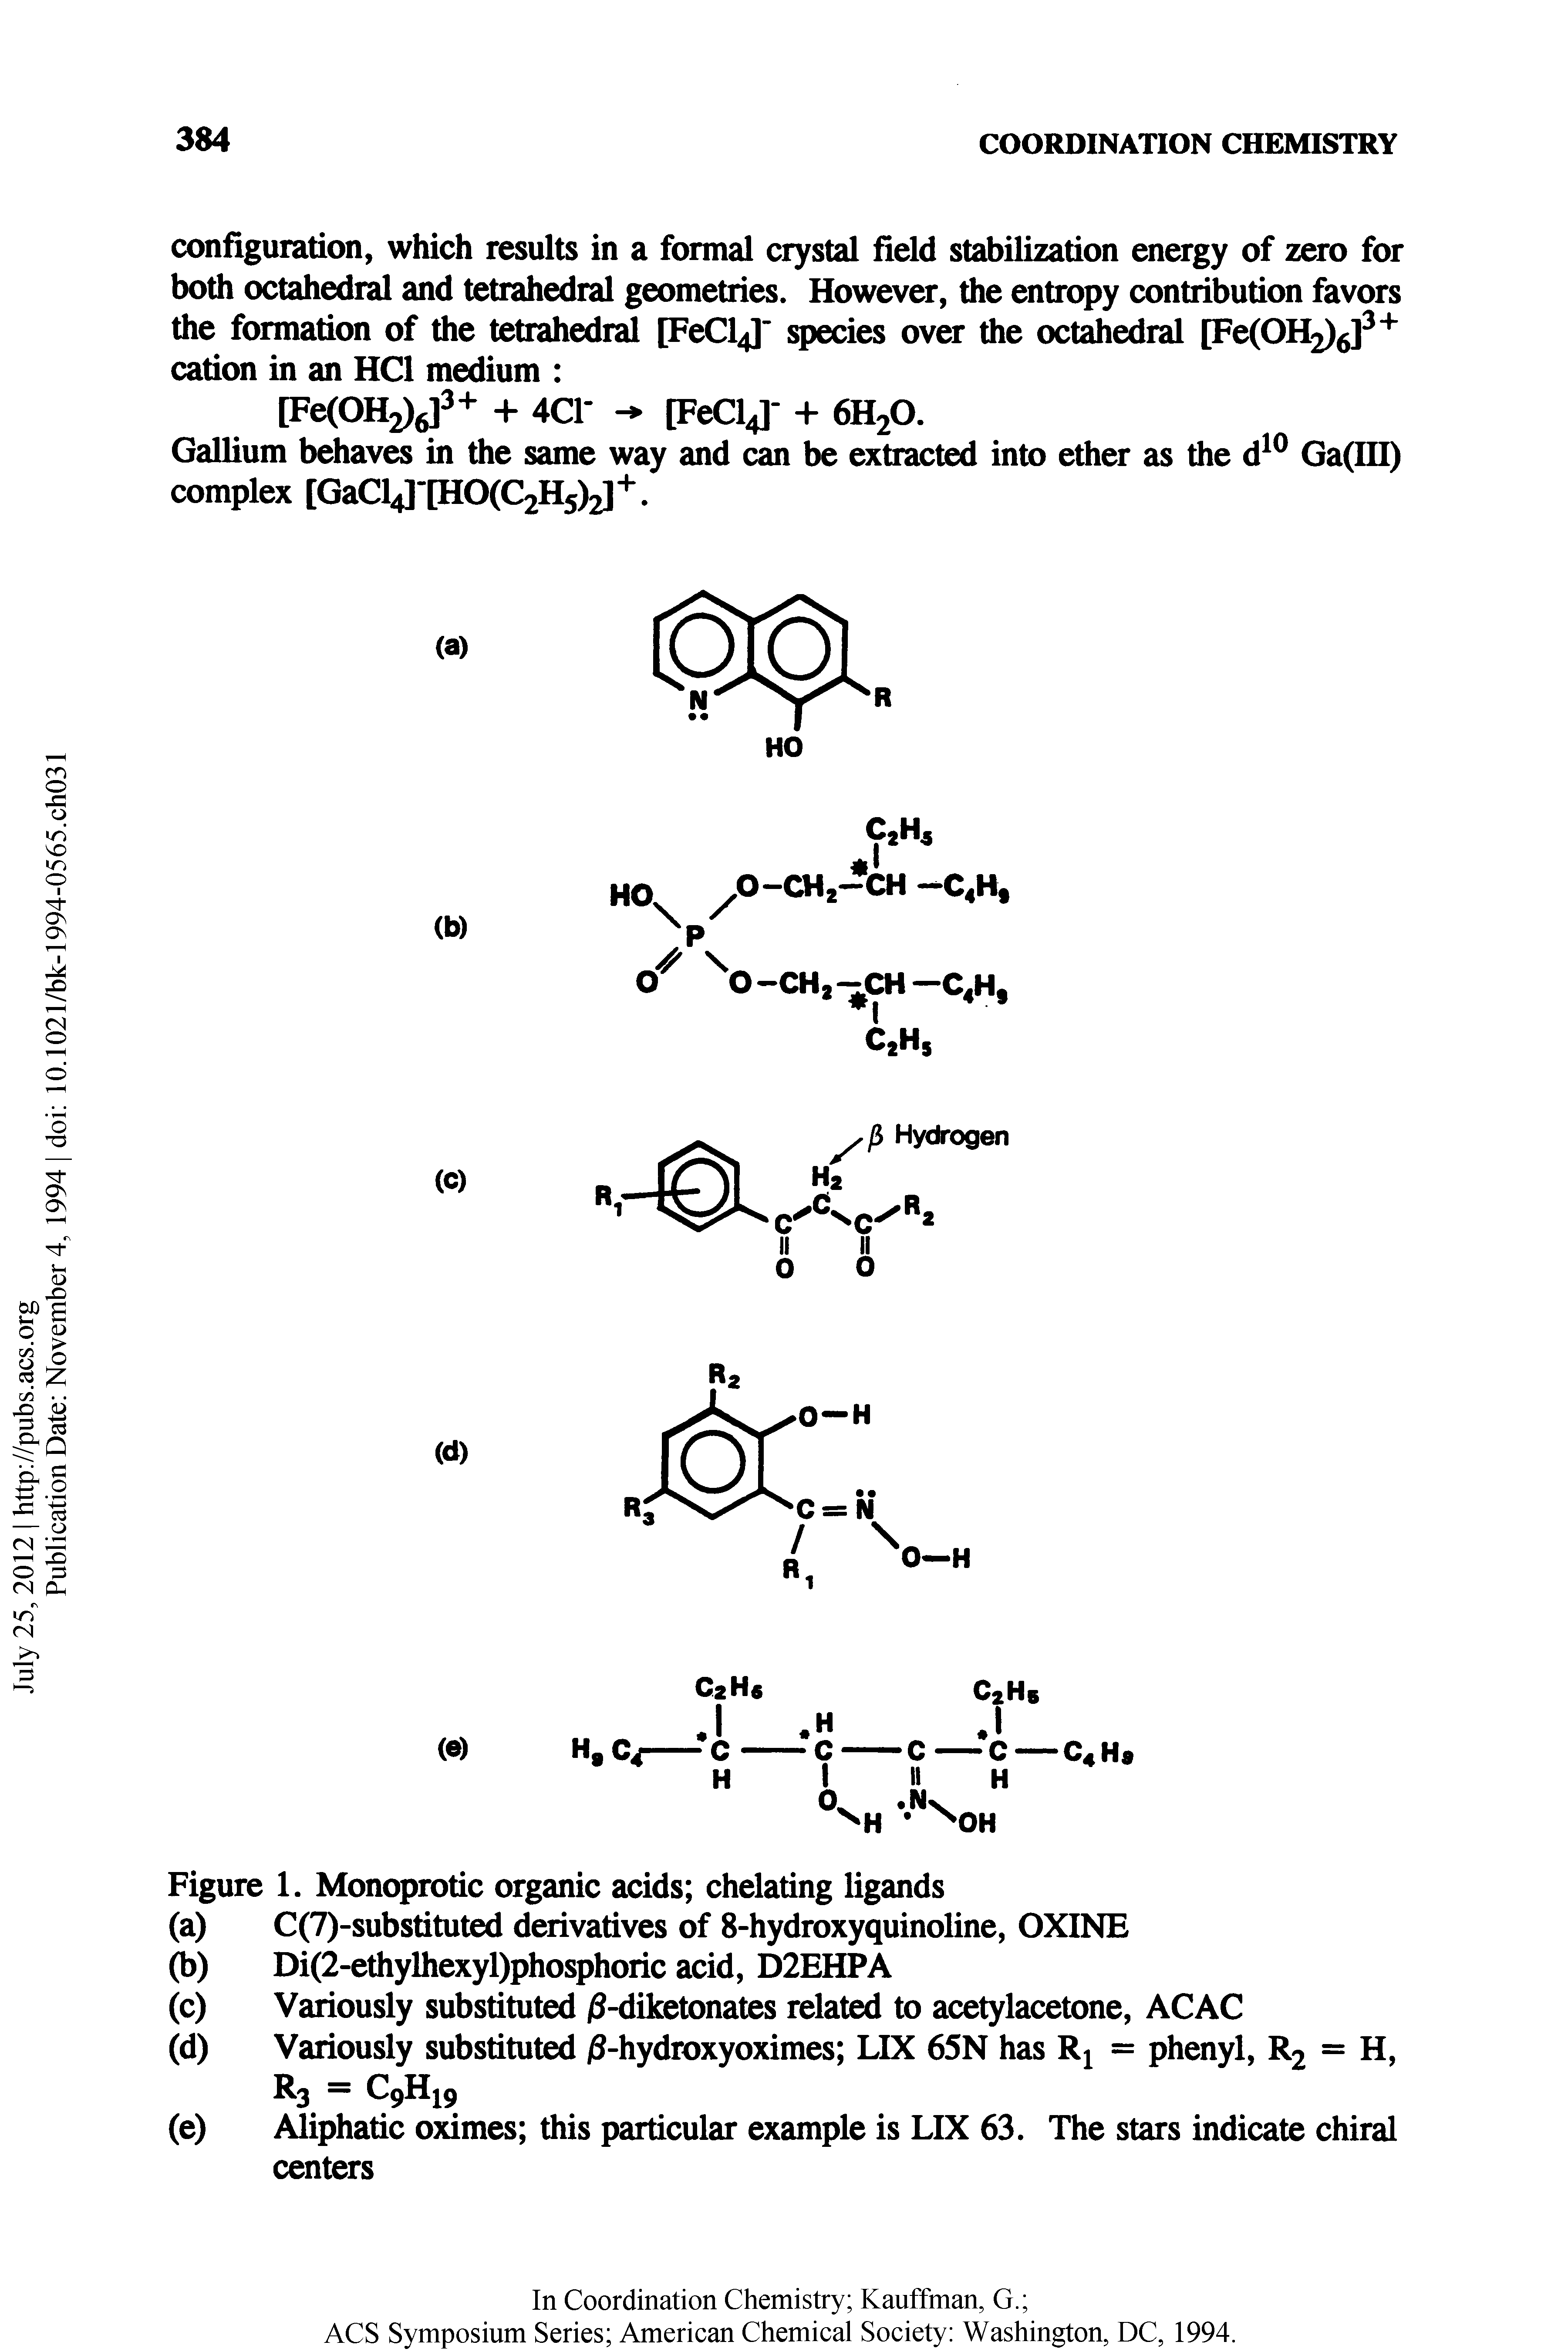 Figure 1. Monoprotic organic acids chelating ligands (a) C(7)-substituted derivatives of 8-hydroxyquinoline, OXINE Di(2-ethylhexyl)phosphoric acid, D2EHPA Variously substituted -diketonates related to acetylacetone, ACAC Variously substituted /S-hydroxyoximes LDC 65N has Rj = phenyl, R2 = H, R, ...